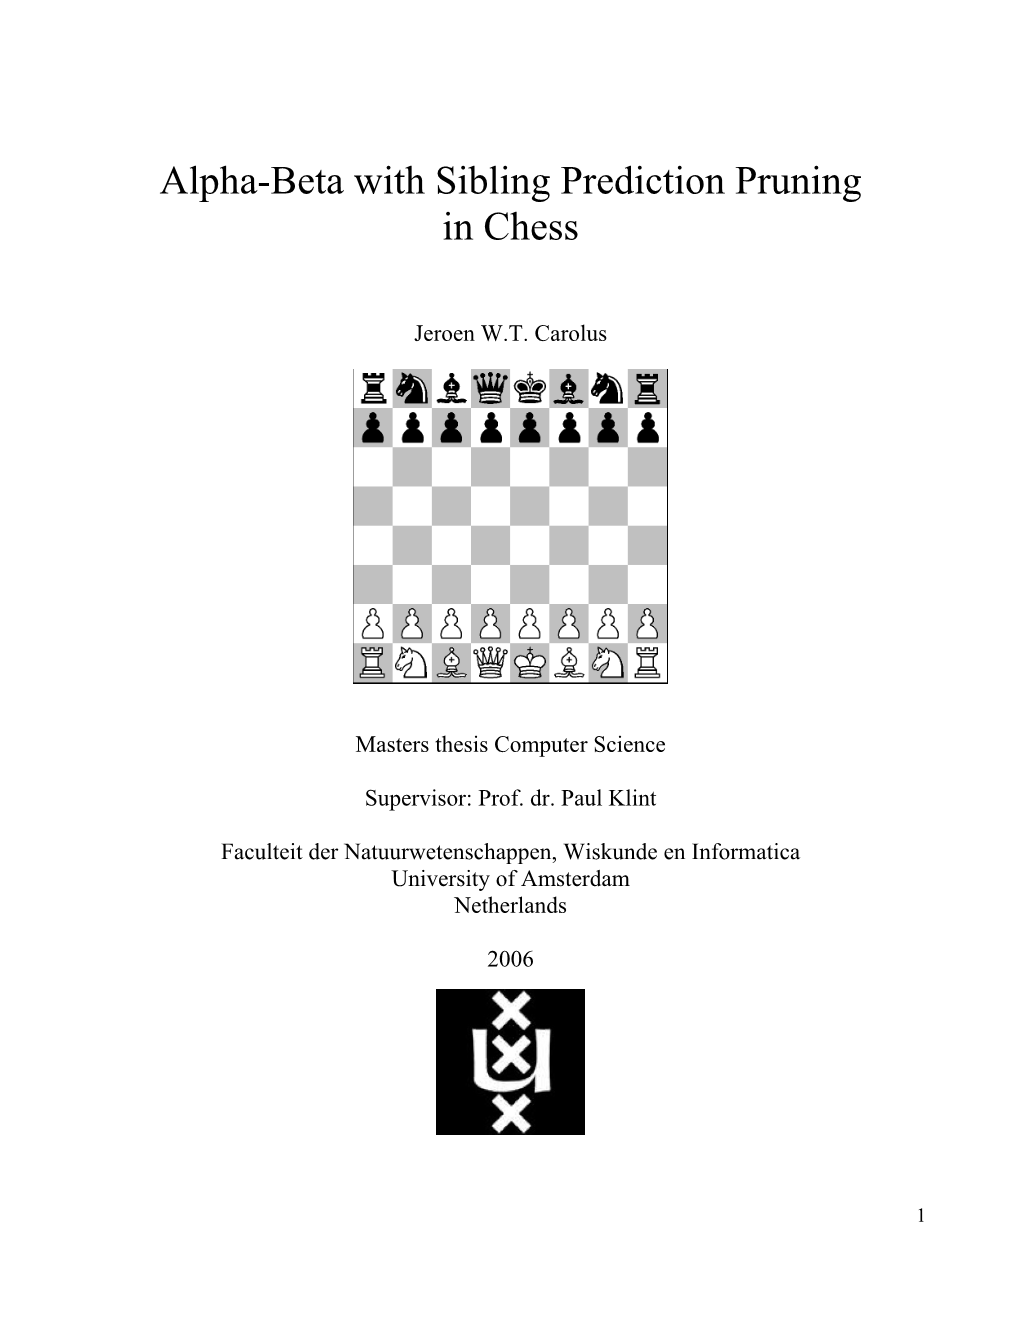 Alpha-Beta with Sibling Prediction Pruning in Chess